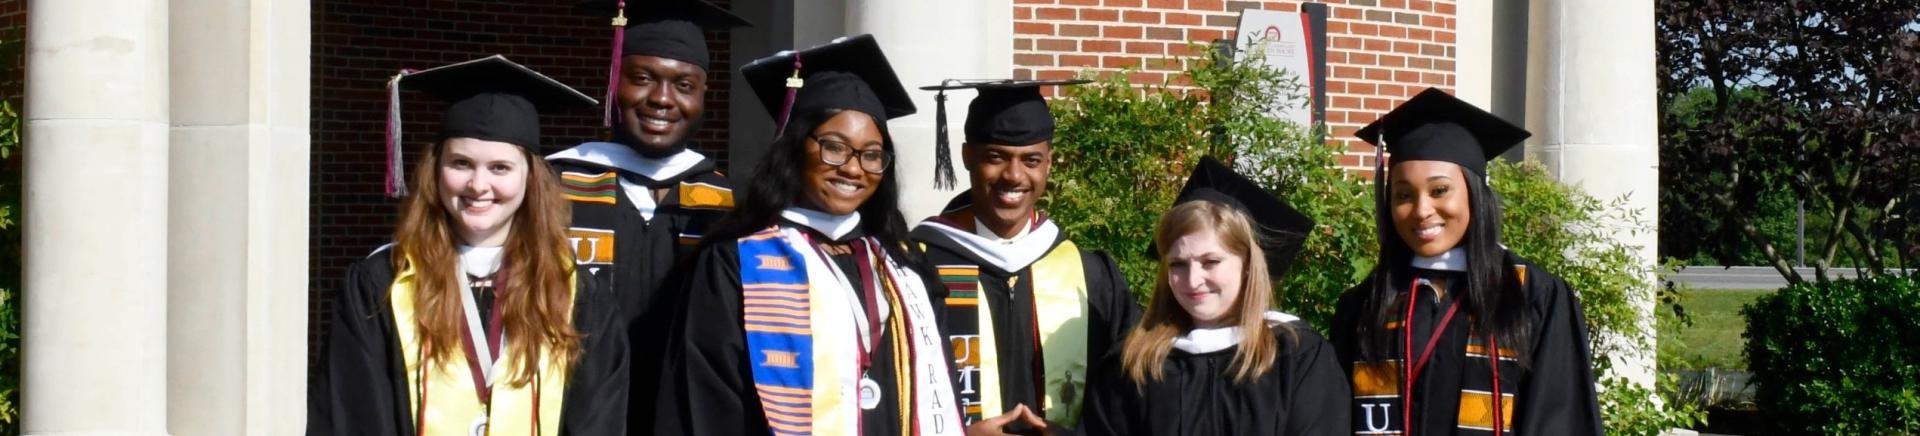 UMES students smile in their graduation robes